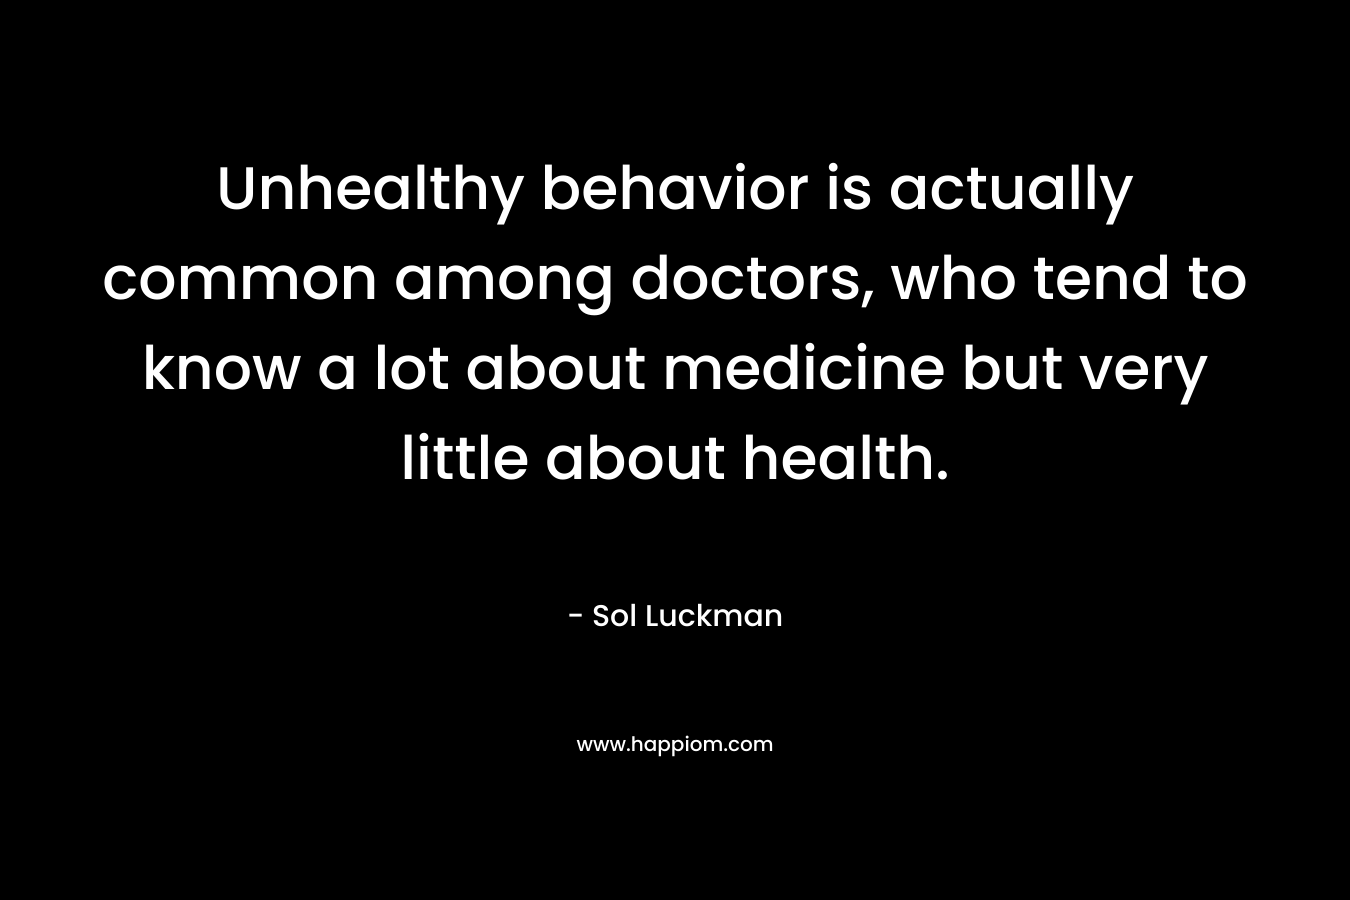 Unhealthy behavior is actually common among doctors, who tend to know a lot about medicine but very little about health.